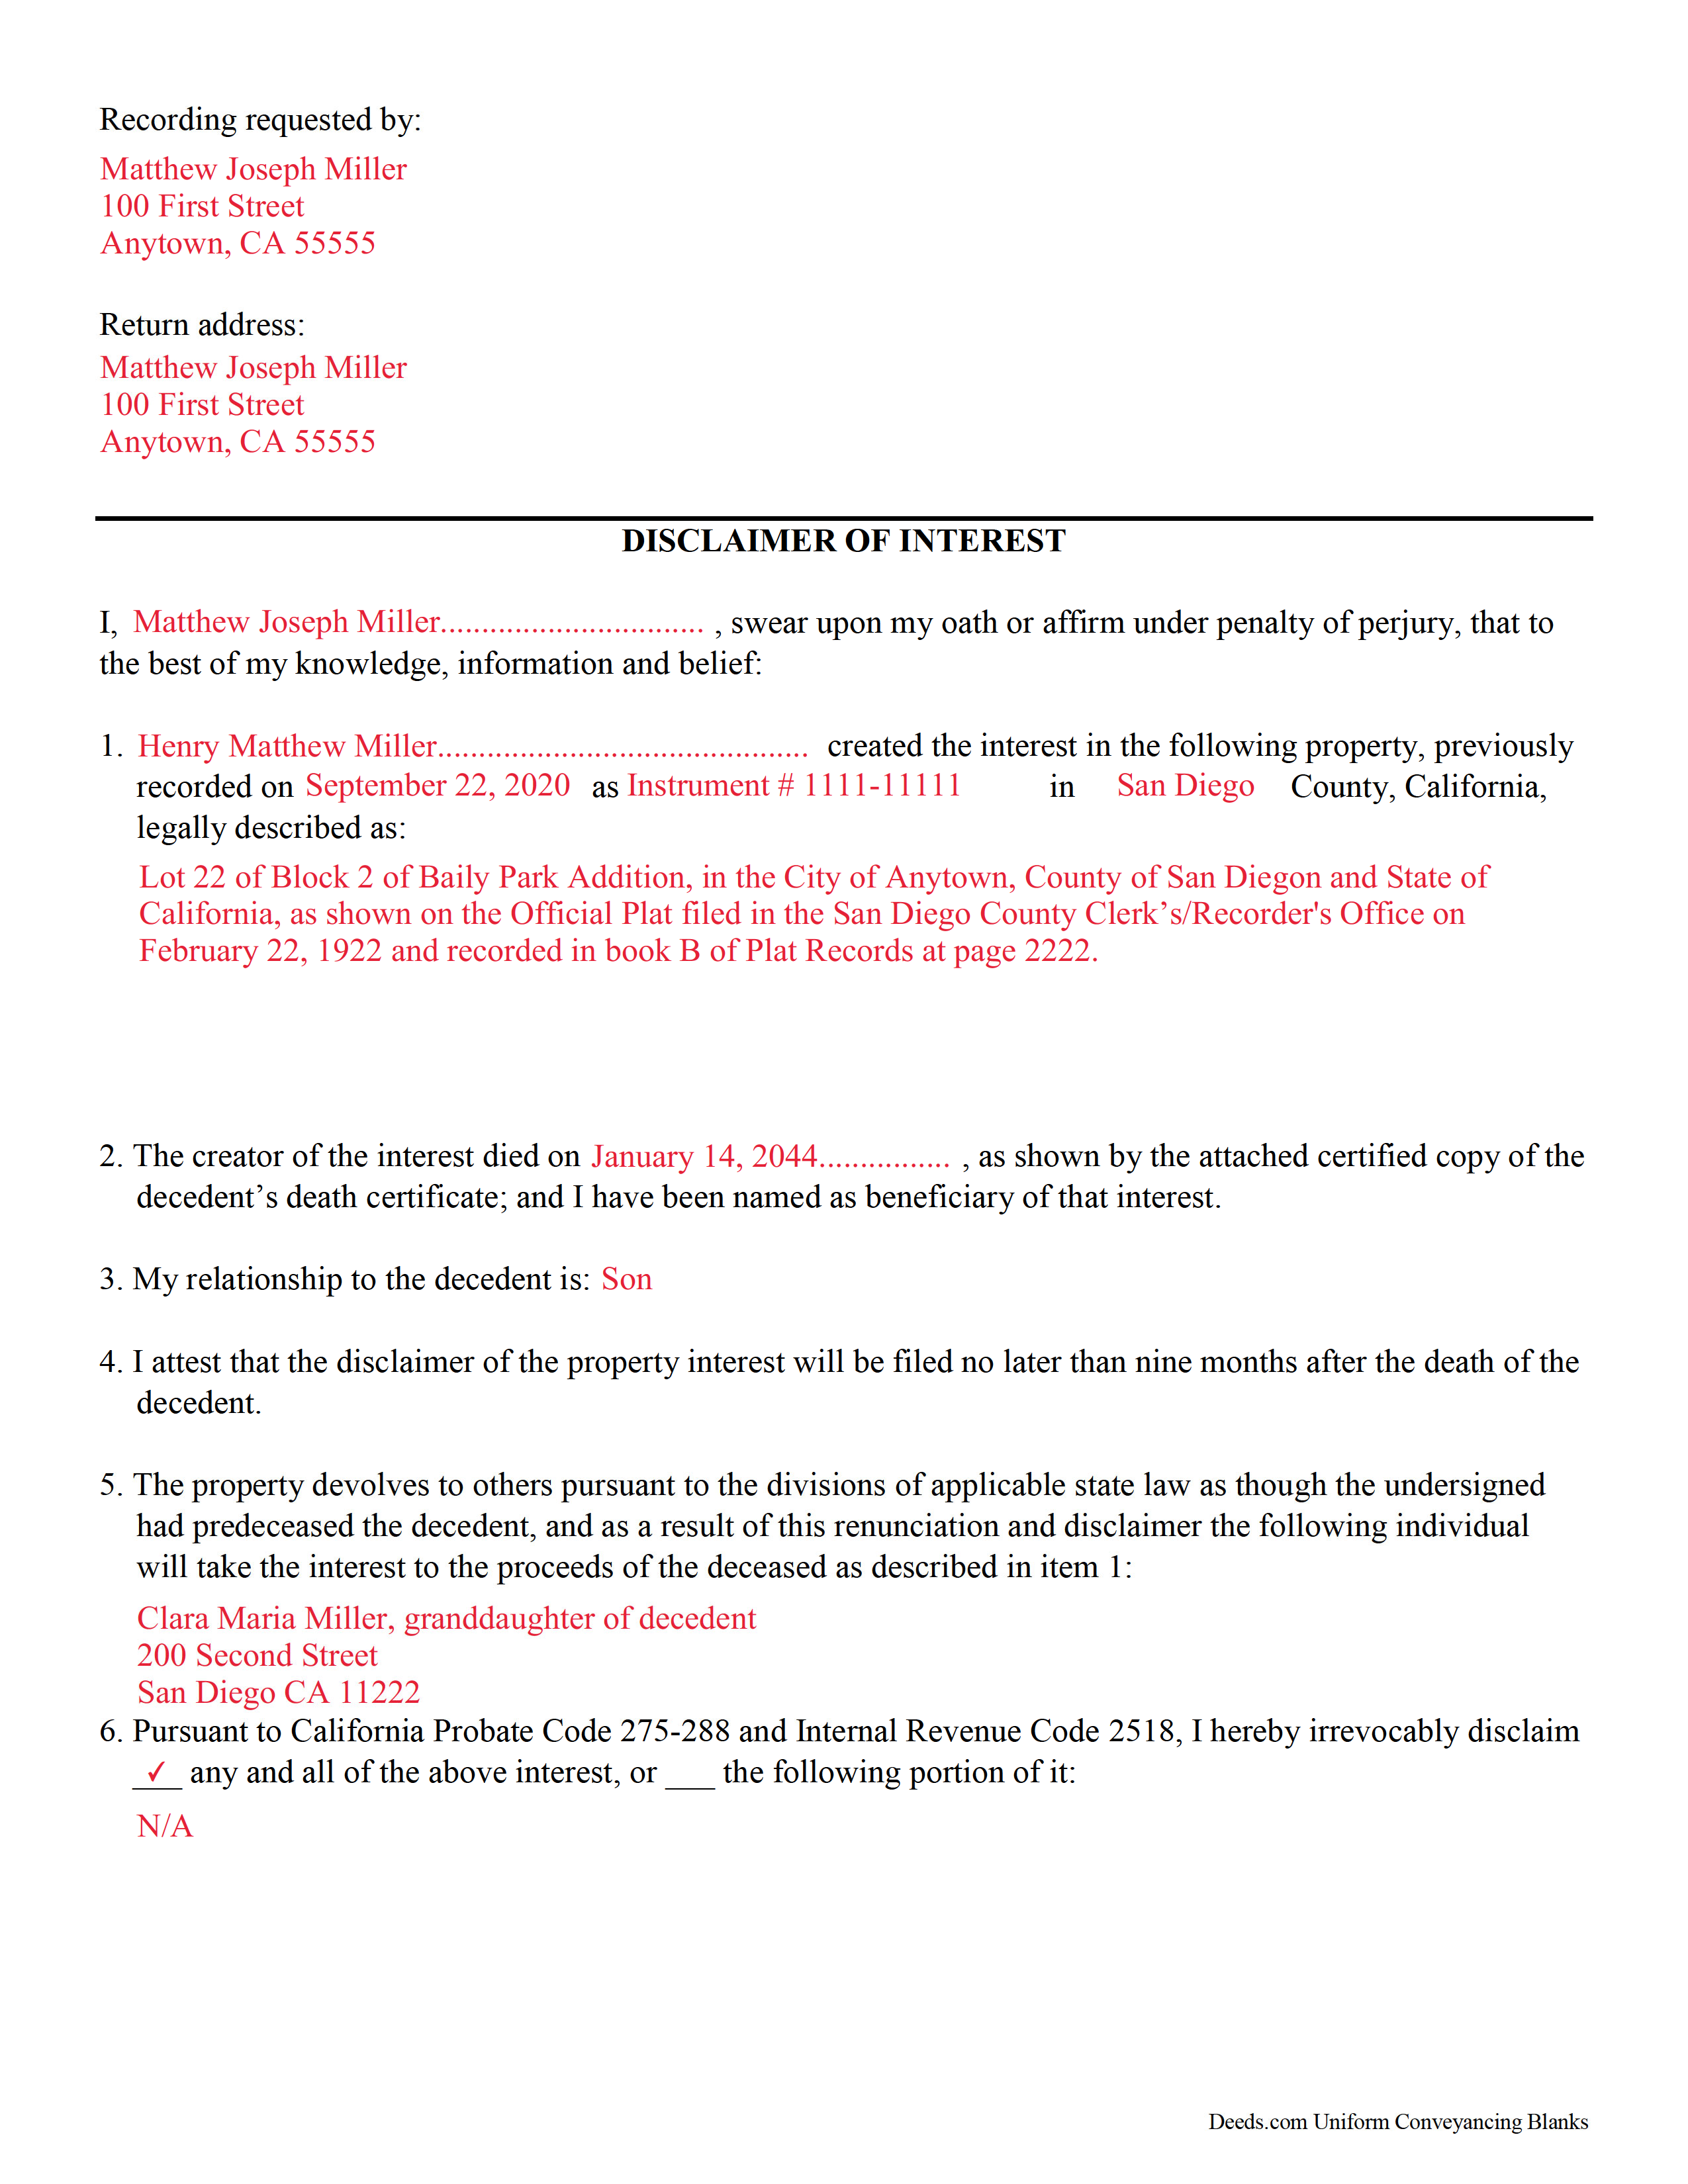 Completed Example of the Disclaimer of Interest Form